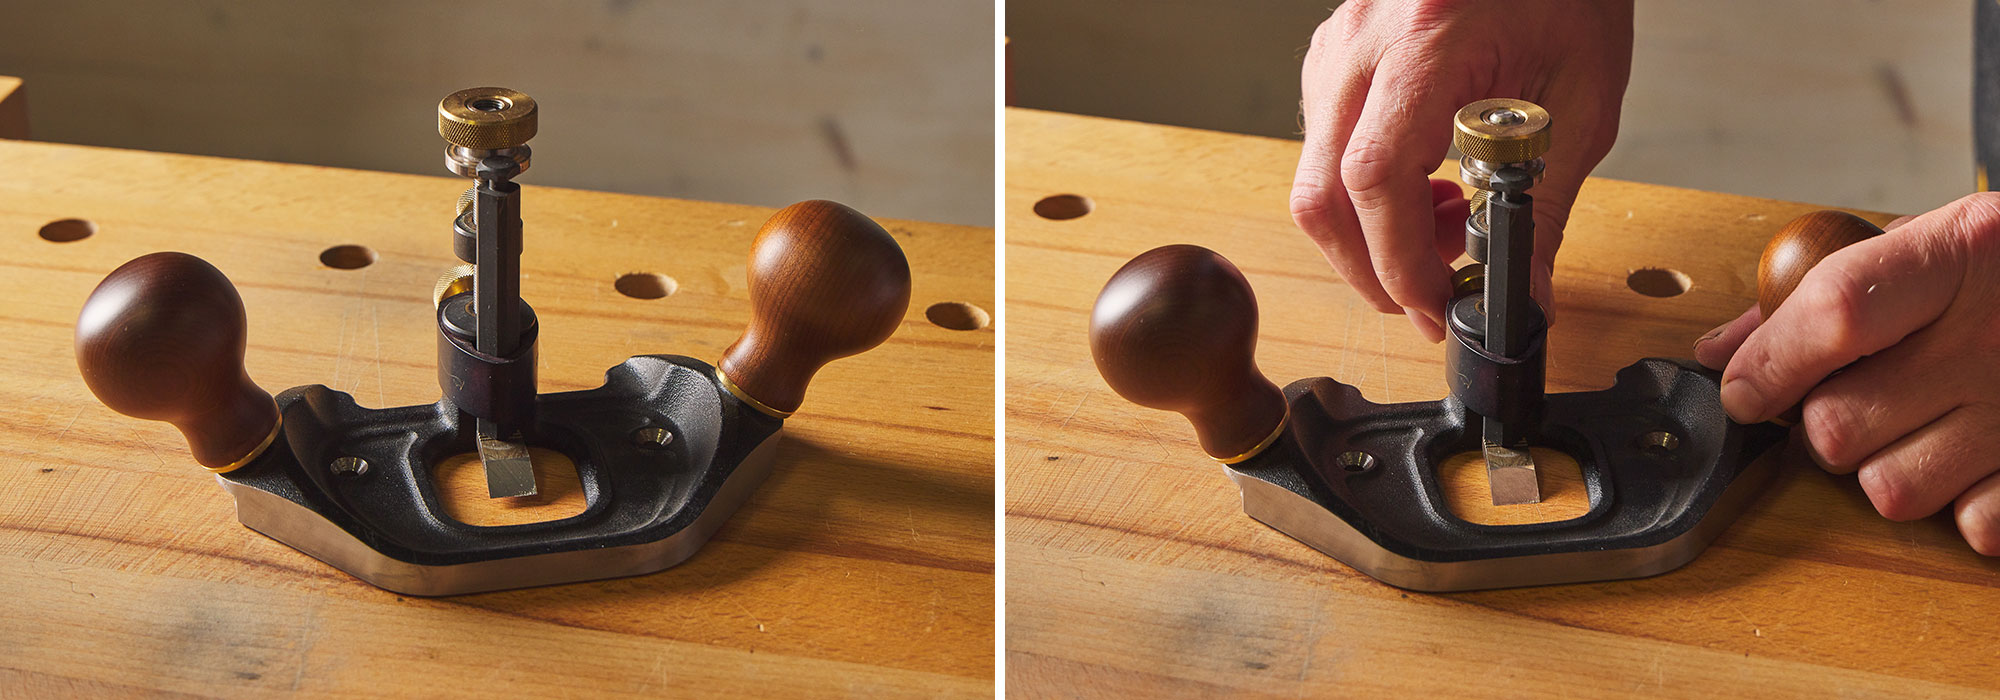 Image left: Router plane with blade above the reference surface. Image right: Router plane with set flush with the sole.